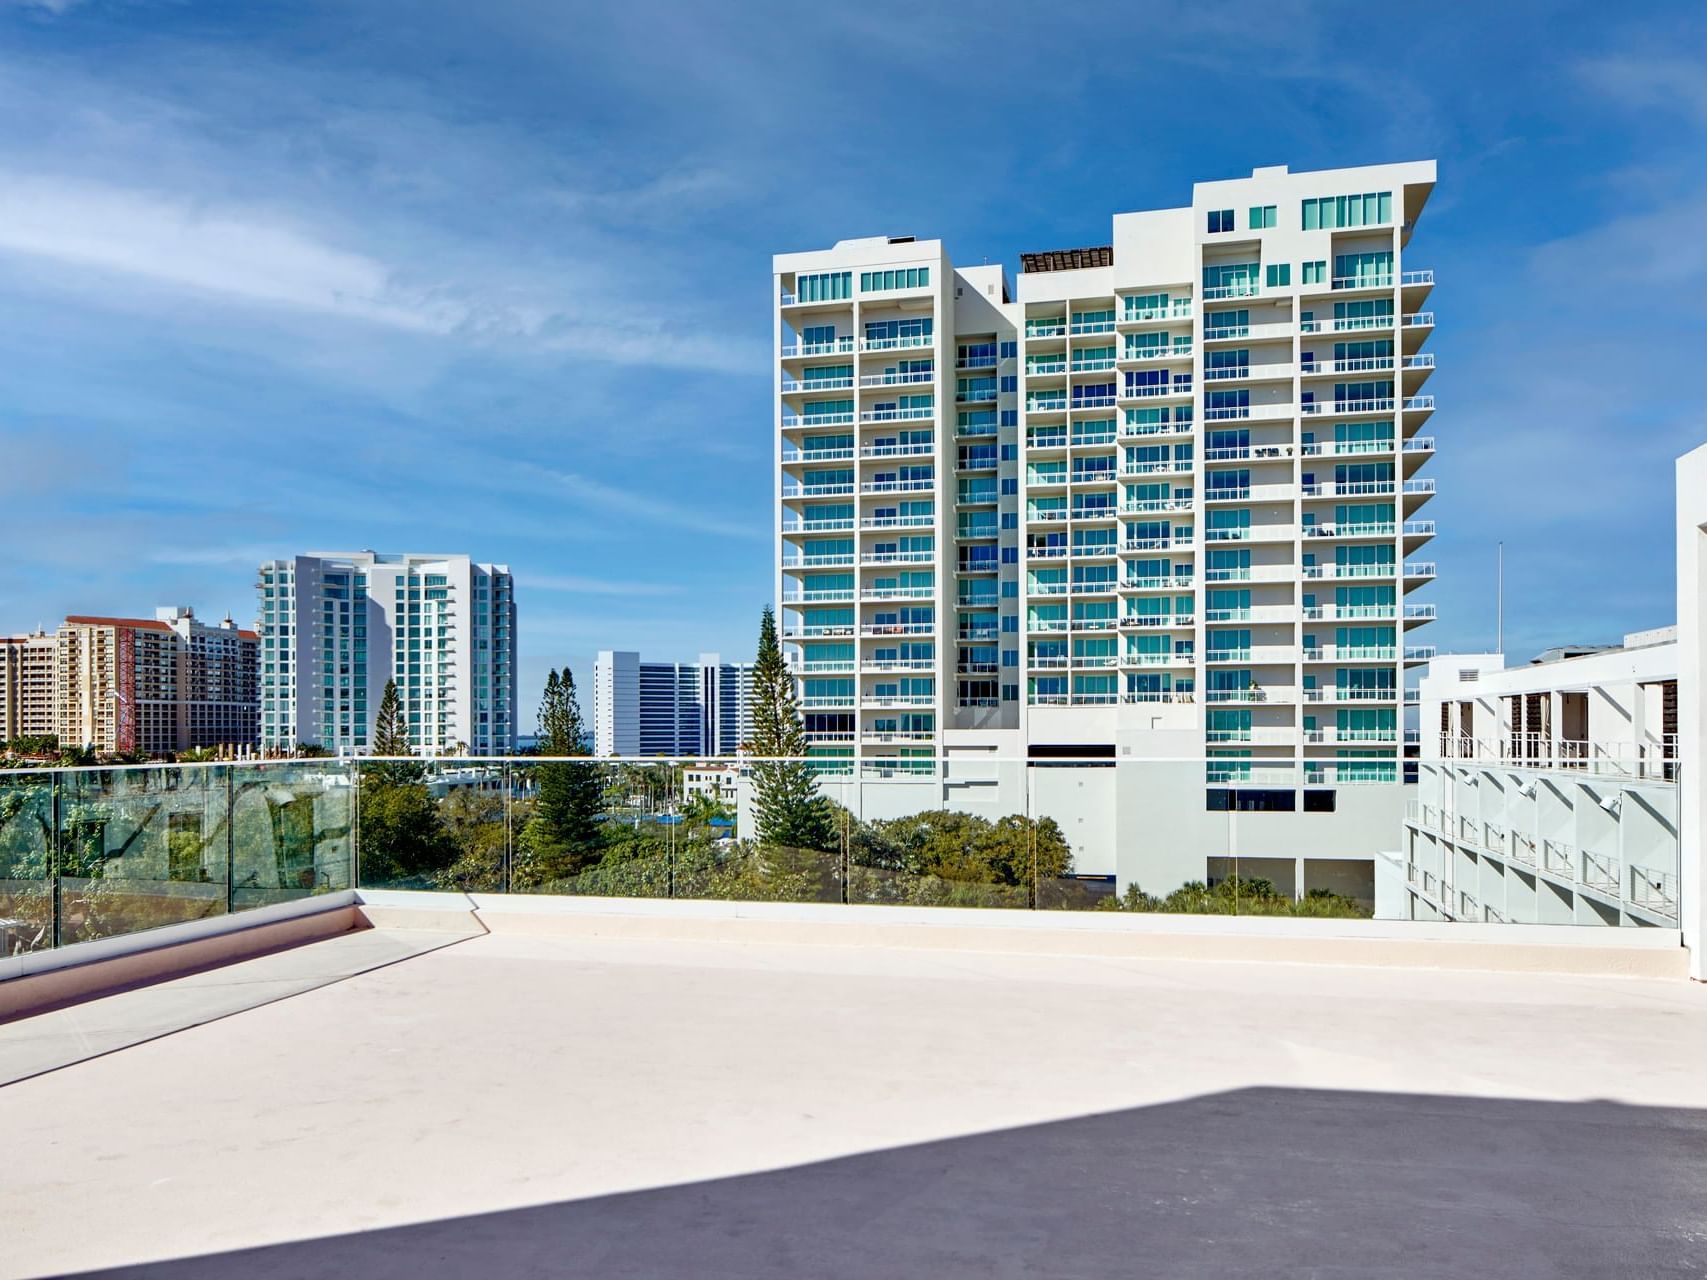 View of buildings from The Terrace at The Sarasota Modern